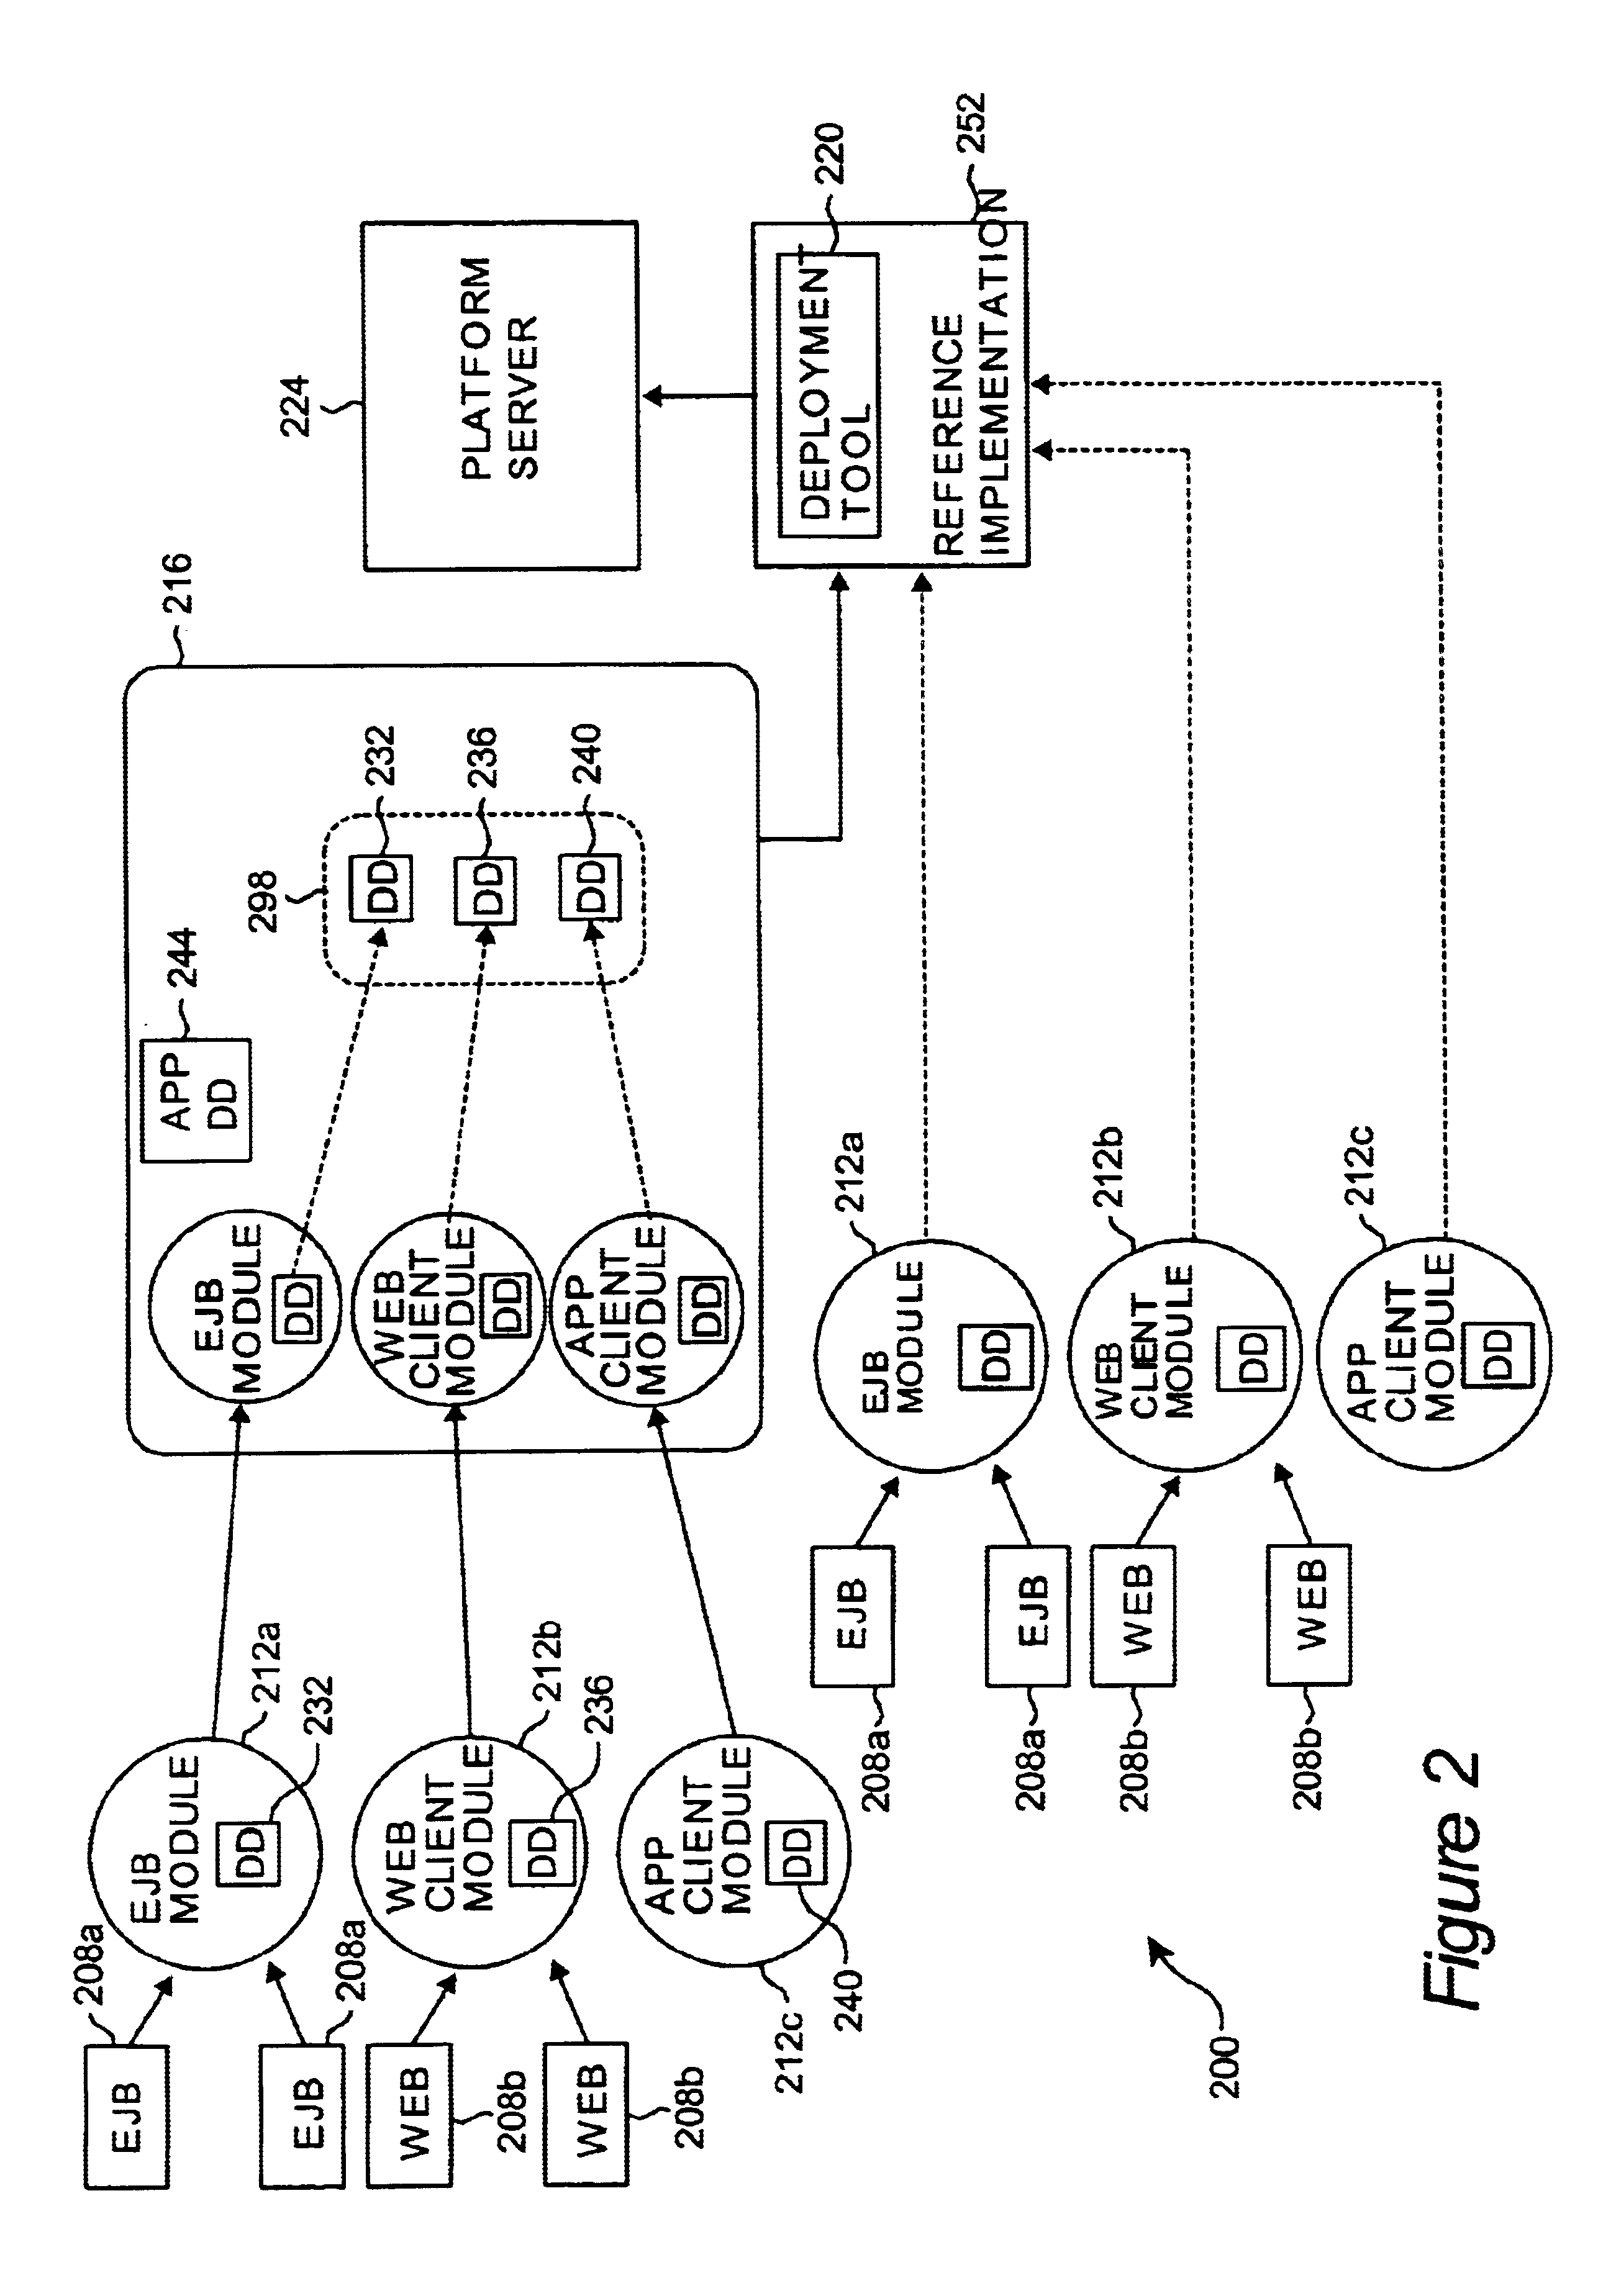 Method and apparatus for implementing deployment descriptors in an enterprise environment